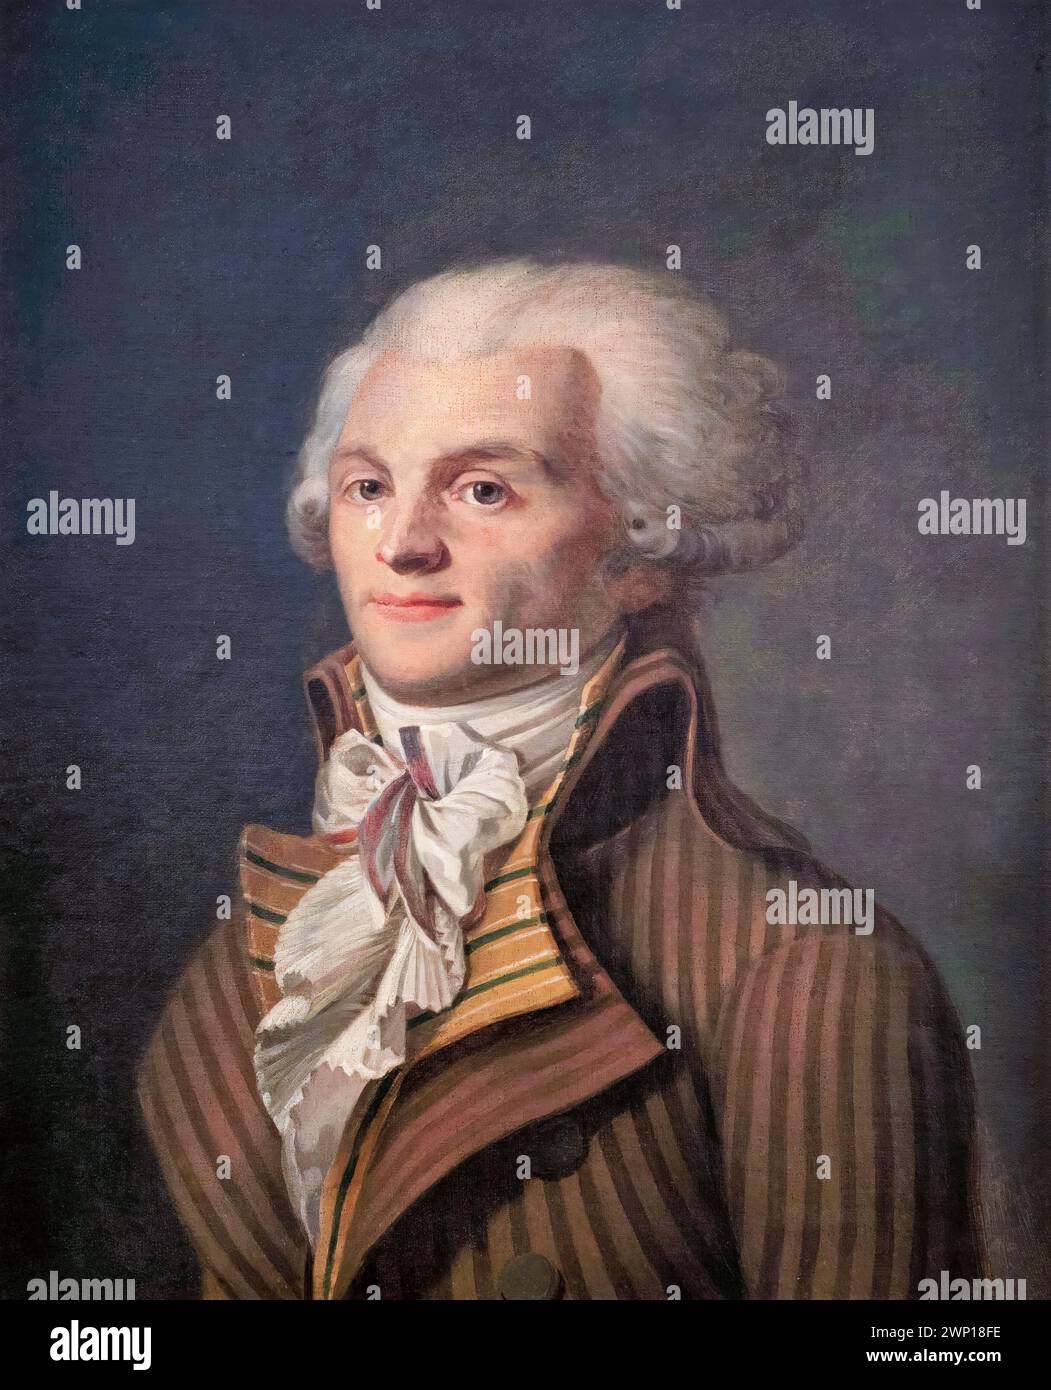 Maximilien Robespierre (1758-1794), French lawyer and statesman, controversial figure of the French Revolution, portrait painting in oil on canvas, circa 1790 Stock Photo